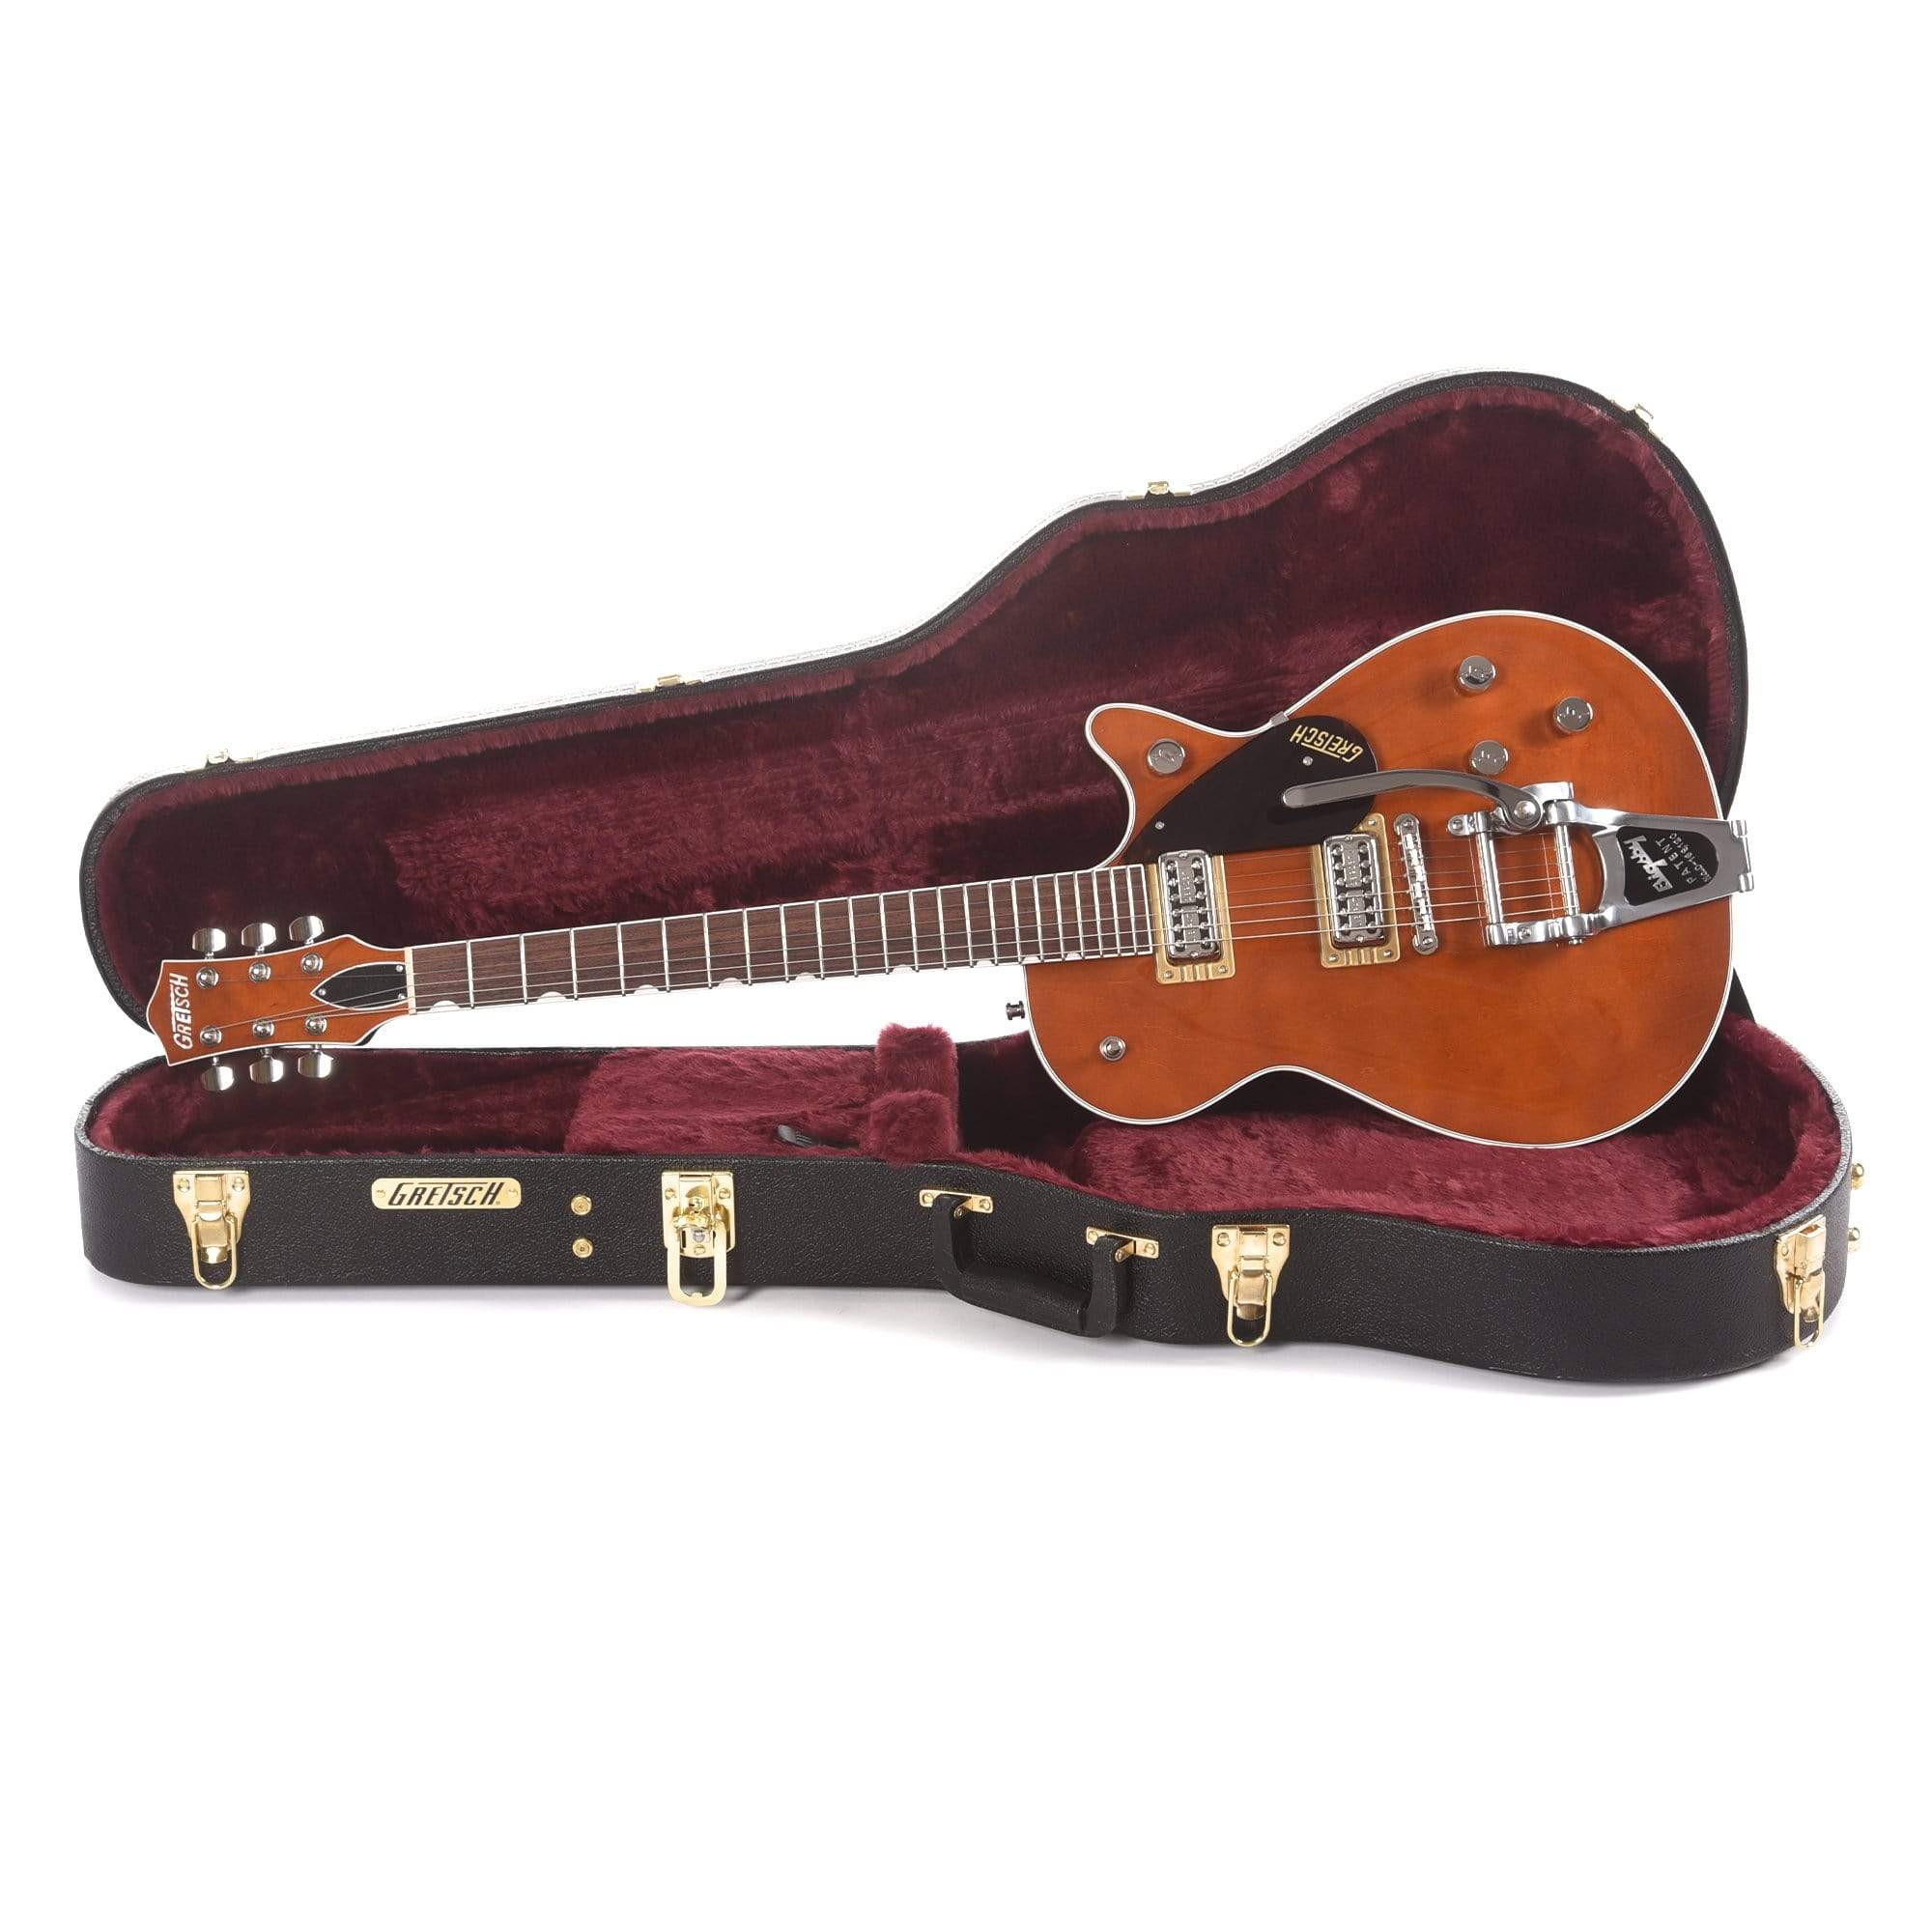 Gretsch G6128T Players Edition Jet FT Electric Guitar - Roundup Orange